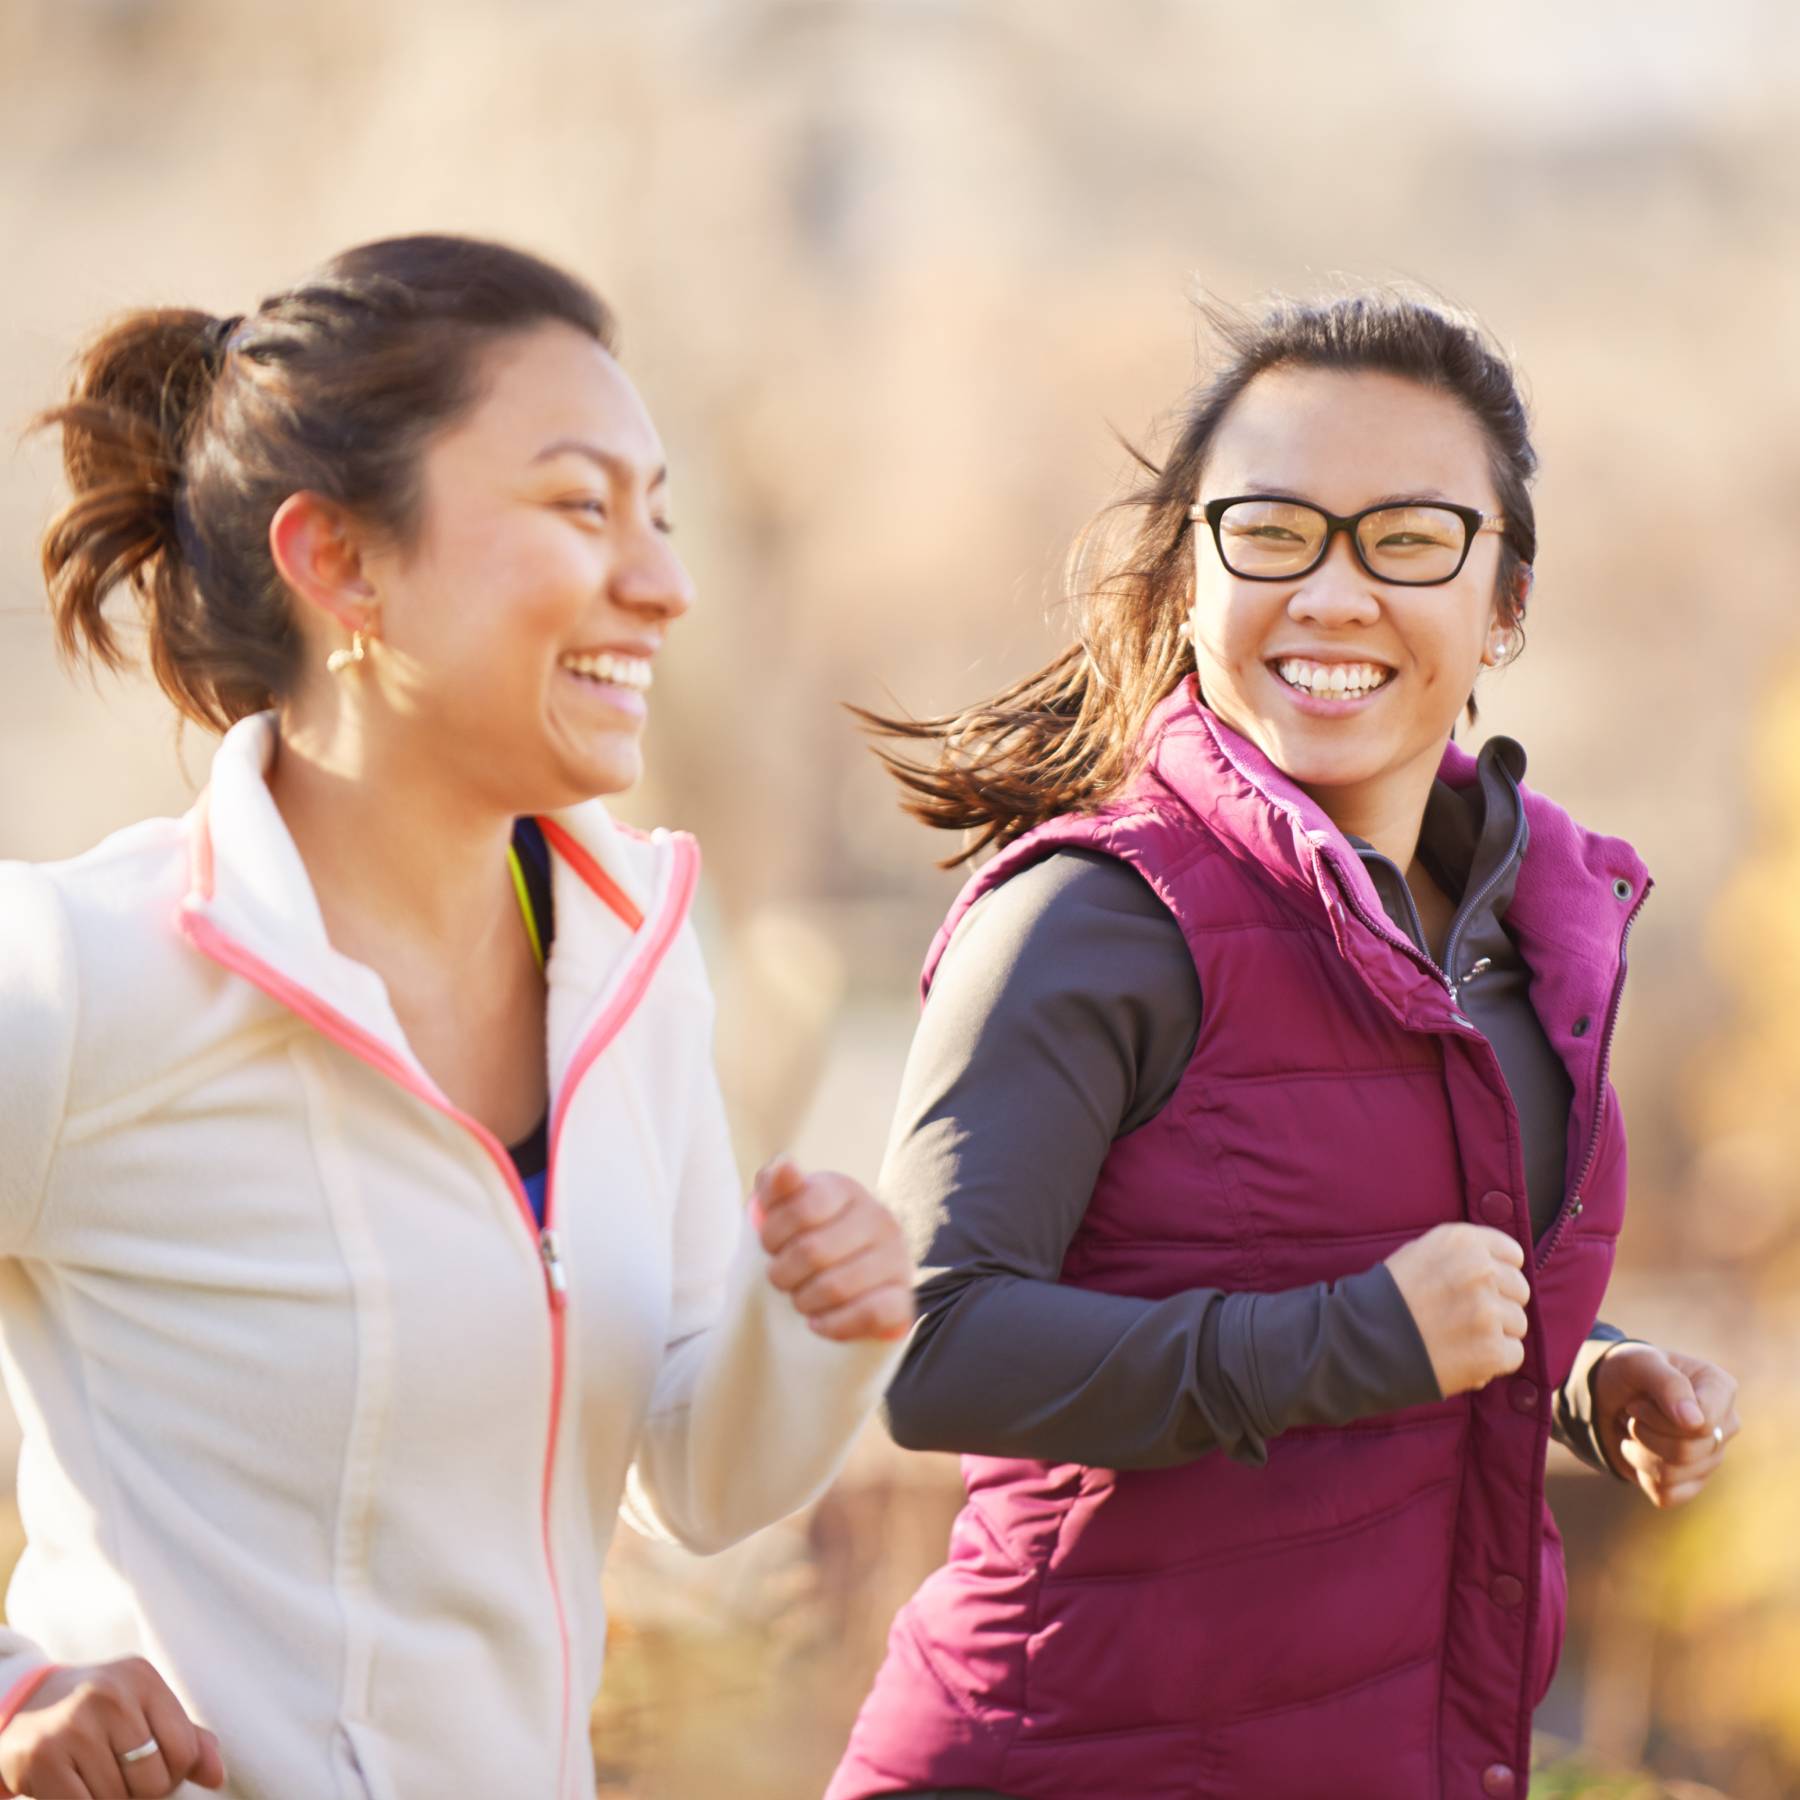 Two young women laughing while jogging outdoors.